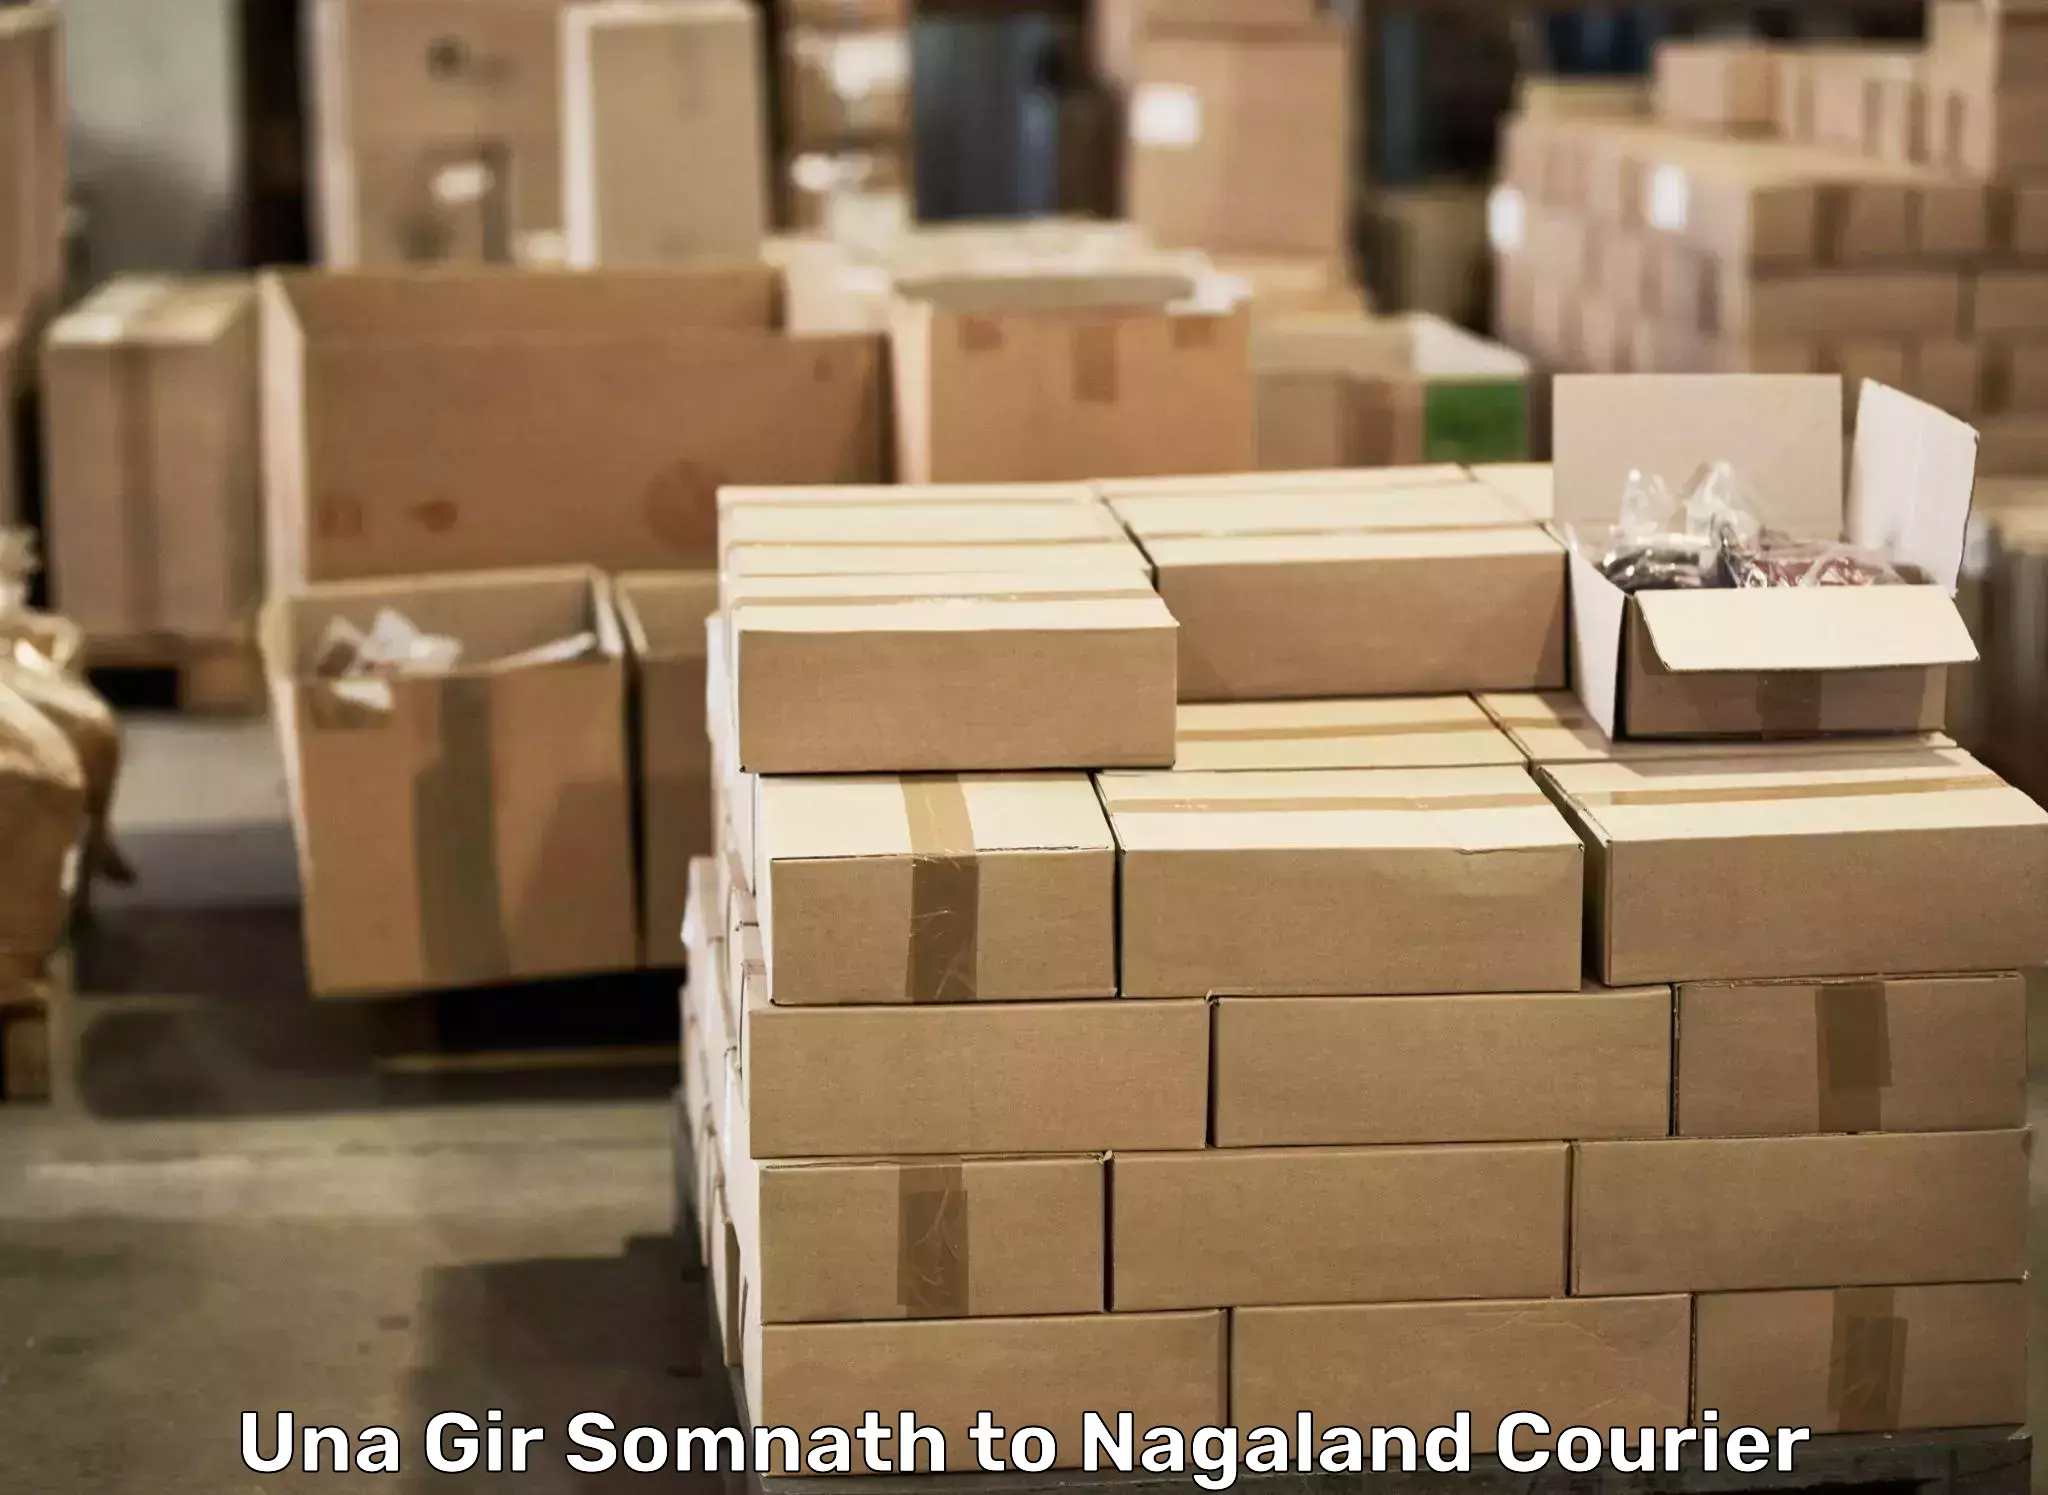 Furniture delivery service Una Gir Somnath to Mokokchung